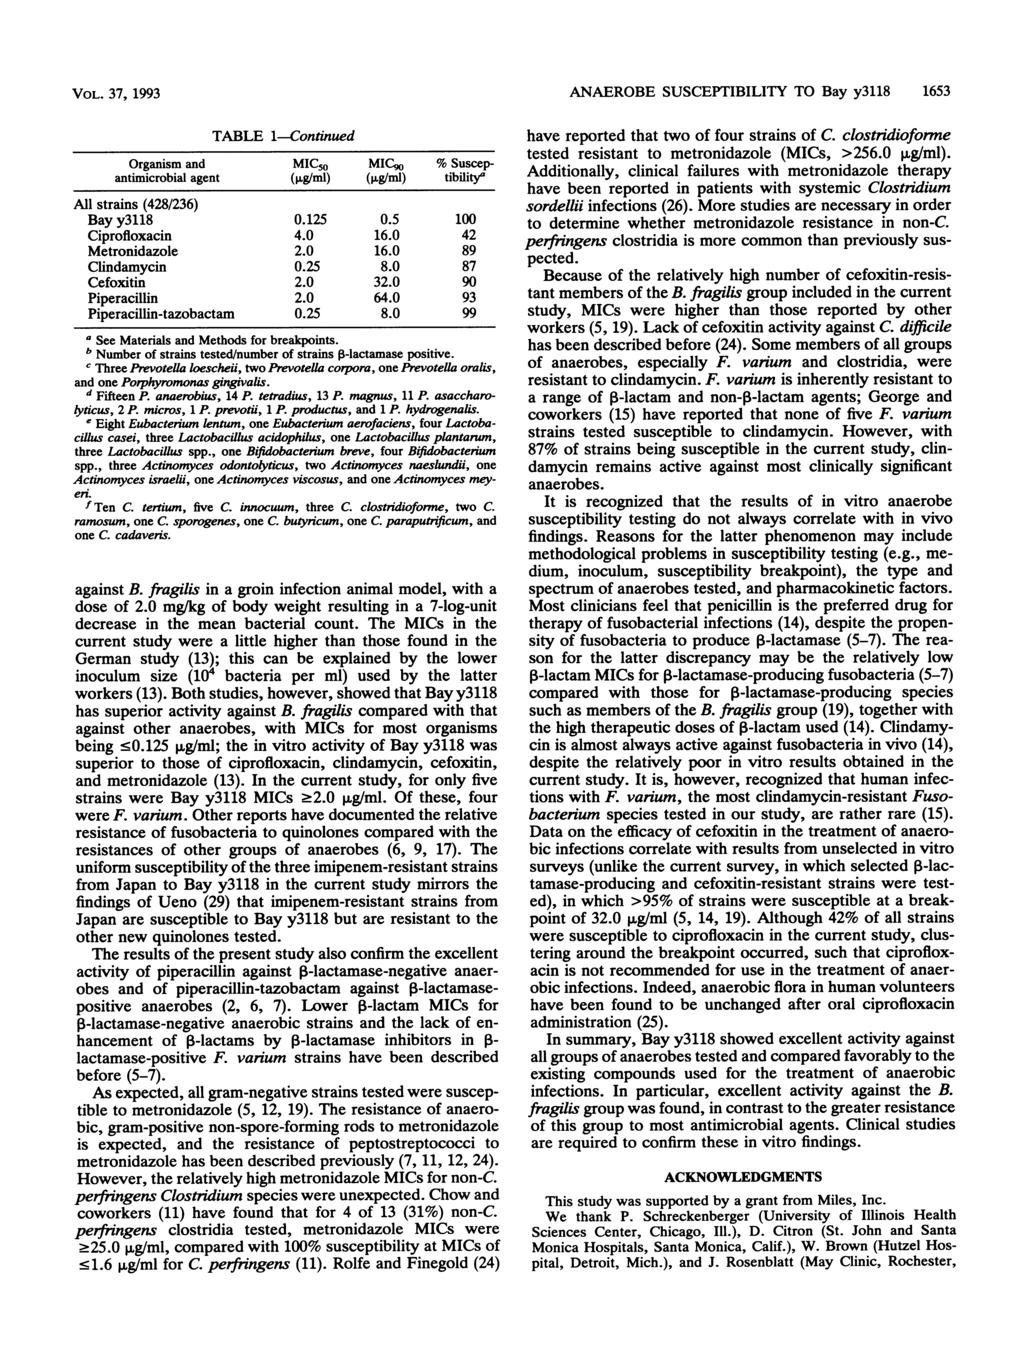 VOL. 37, 1993 Organism and MIC50 MIC9( % Suscepantimicrobial agent (pg/ml) (ig/ml) tibility" All strains (428/236) 42 89 87 3 6 93 99 a See Materials and Methods for breakpoints.